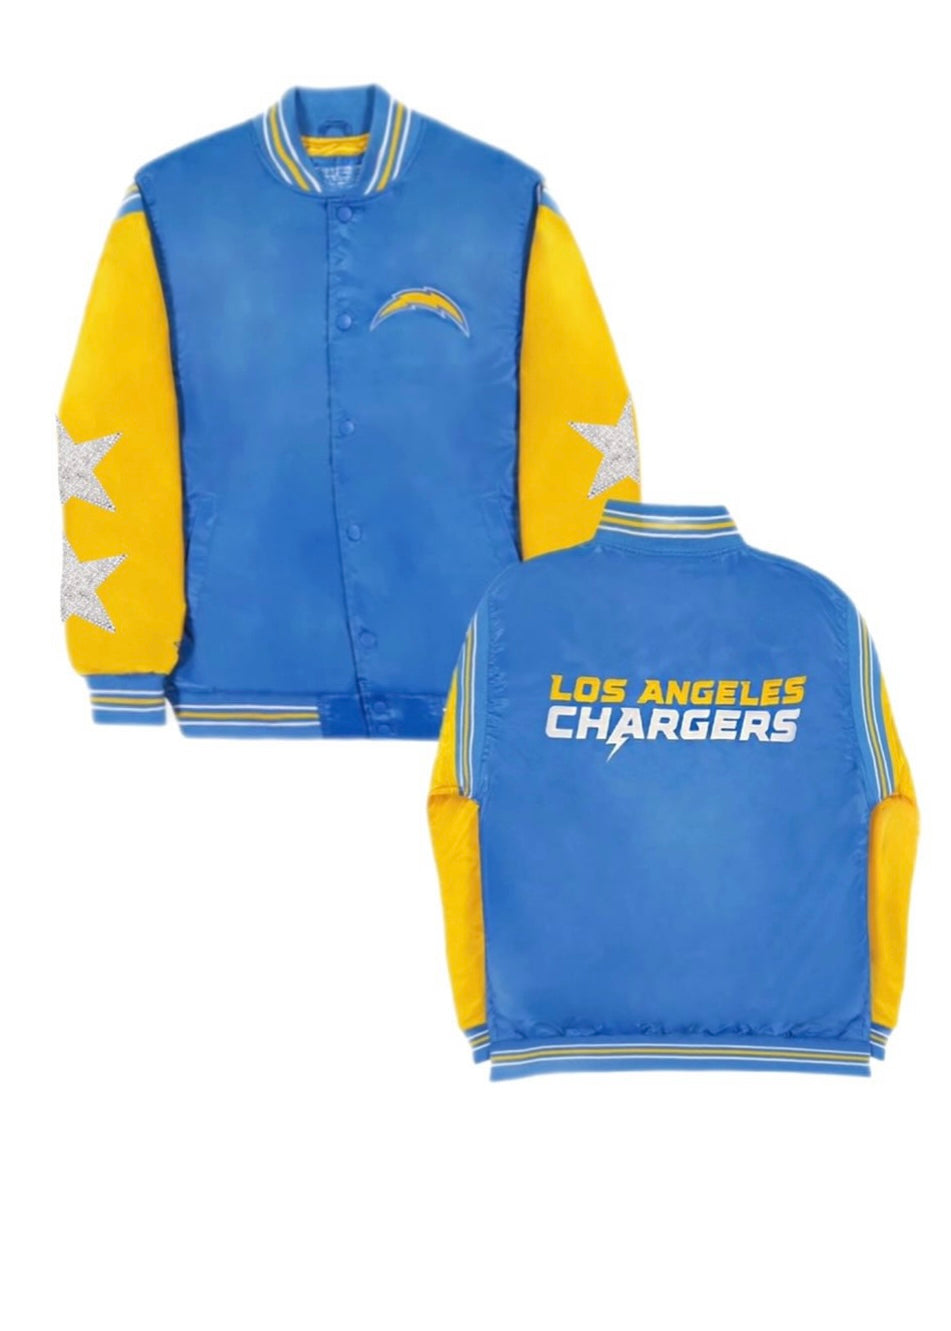 LA Chargers, NFL One of a KIND Satin Jacket with Crystal Star Design